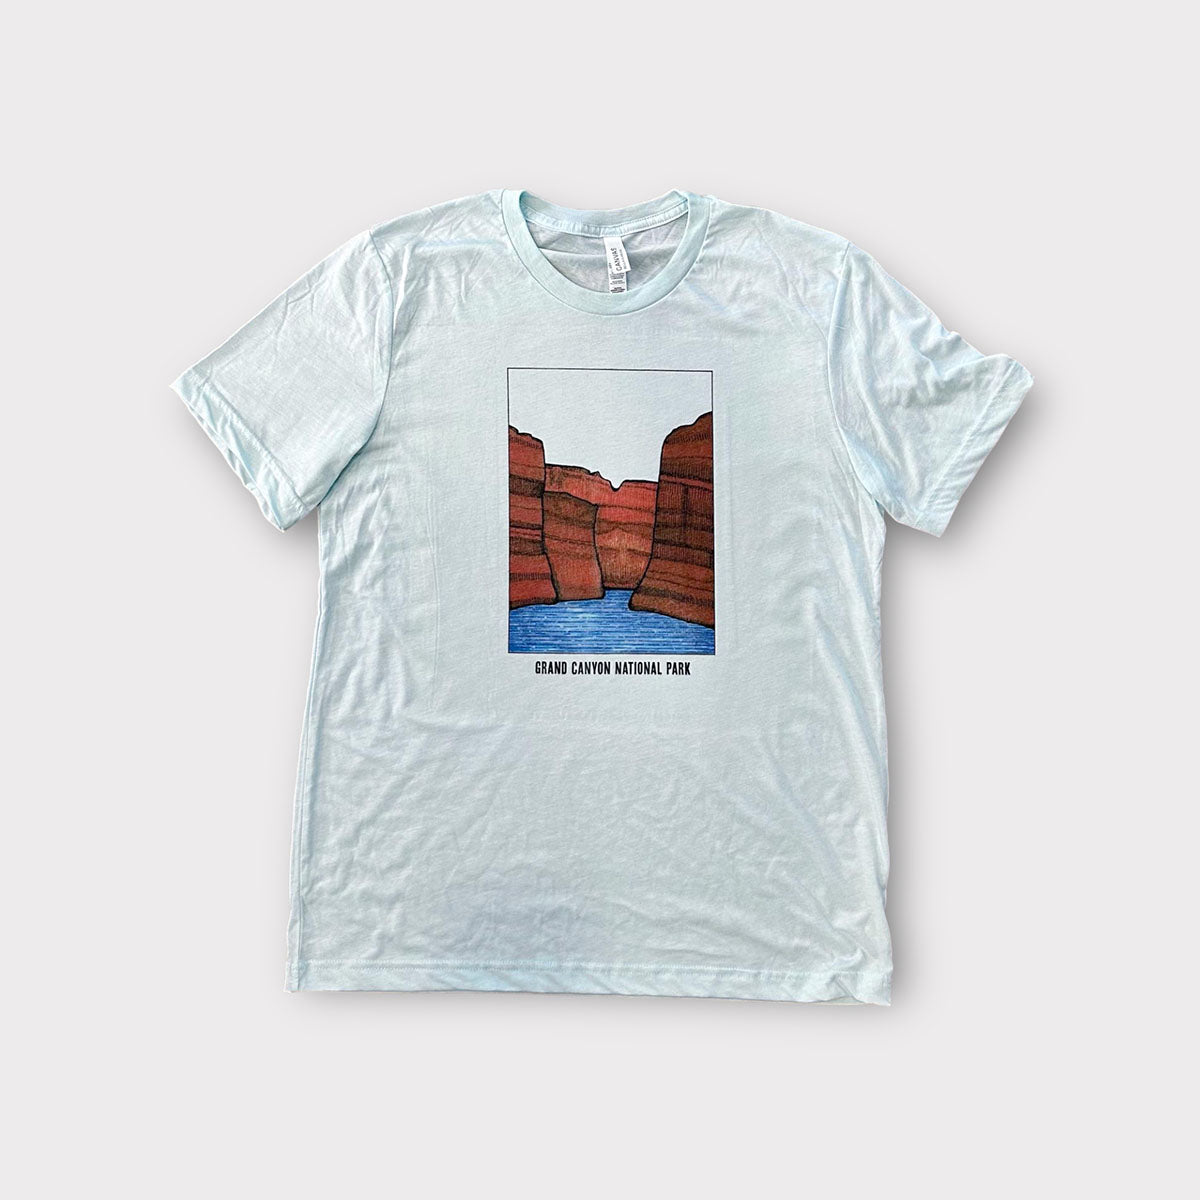 Grand Canyon National Park Illustrated Graphic T-Shirt